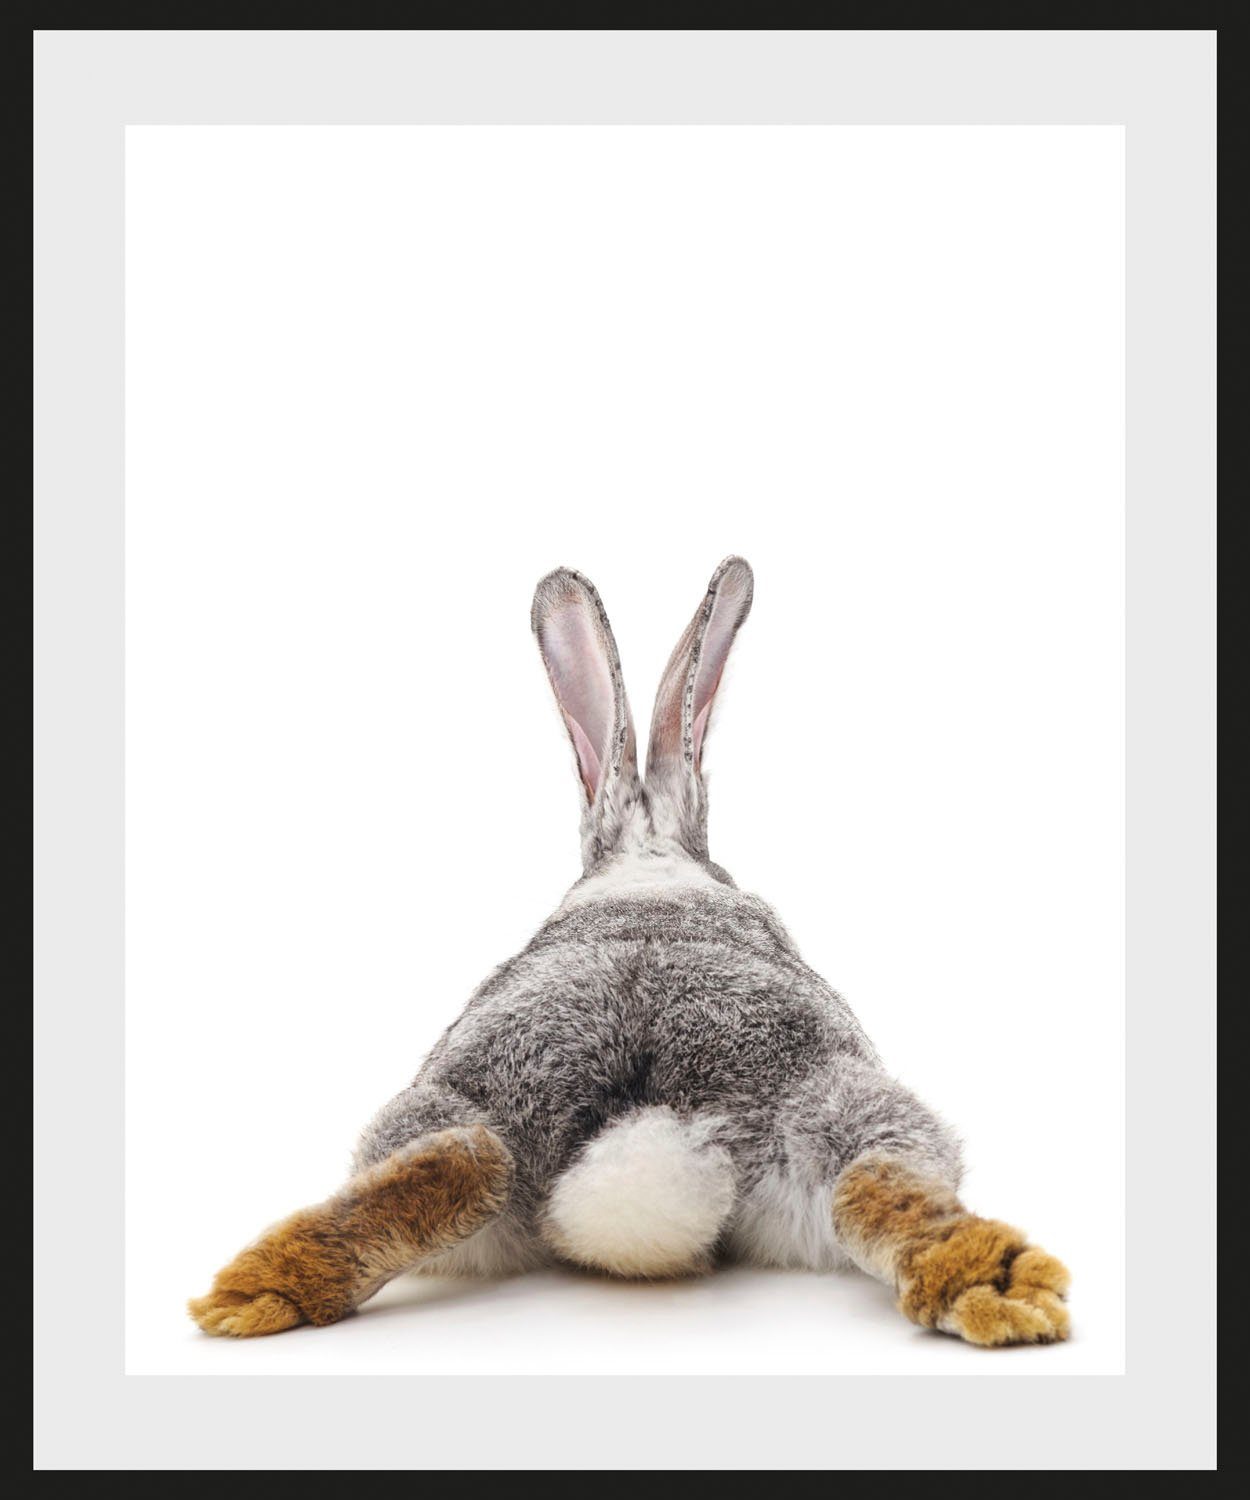 Hase Bunny Tail, Bild St) queence (1